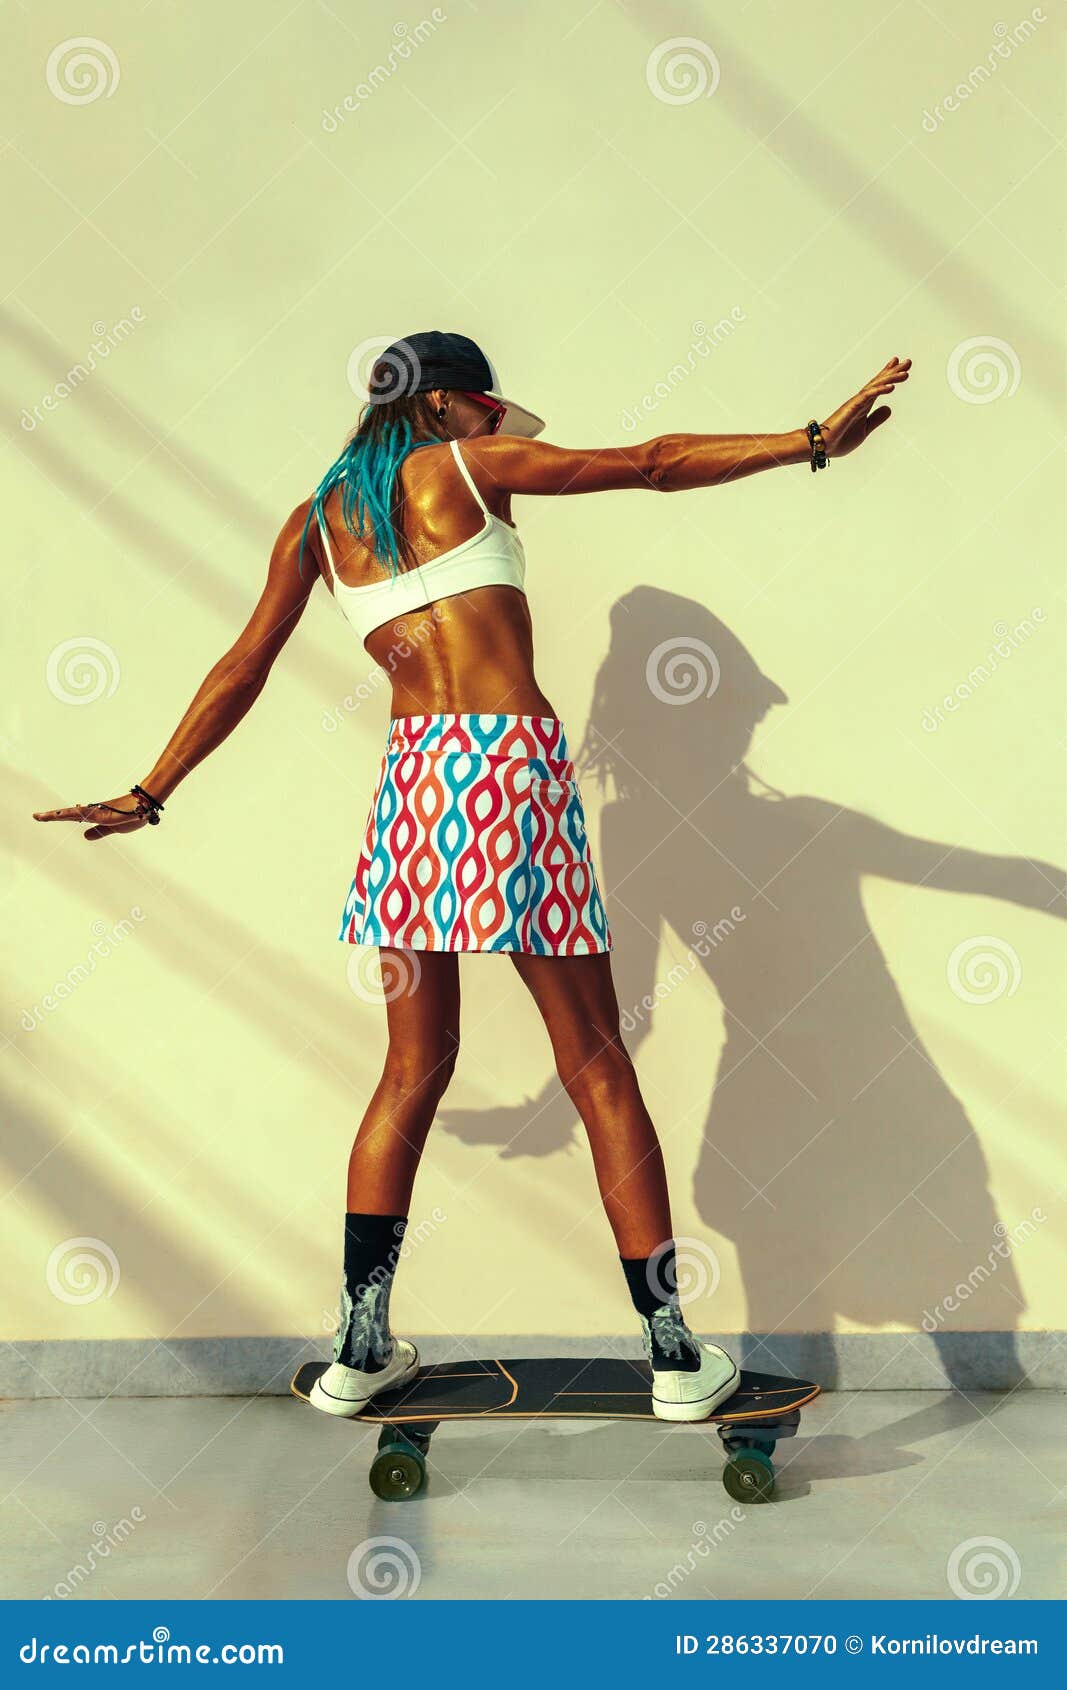 full-length shot of a skater woman`s back wearing fancy clothes and riding her skateboard in front of a yellow wall with shadows